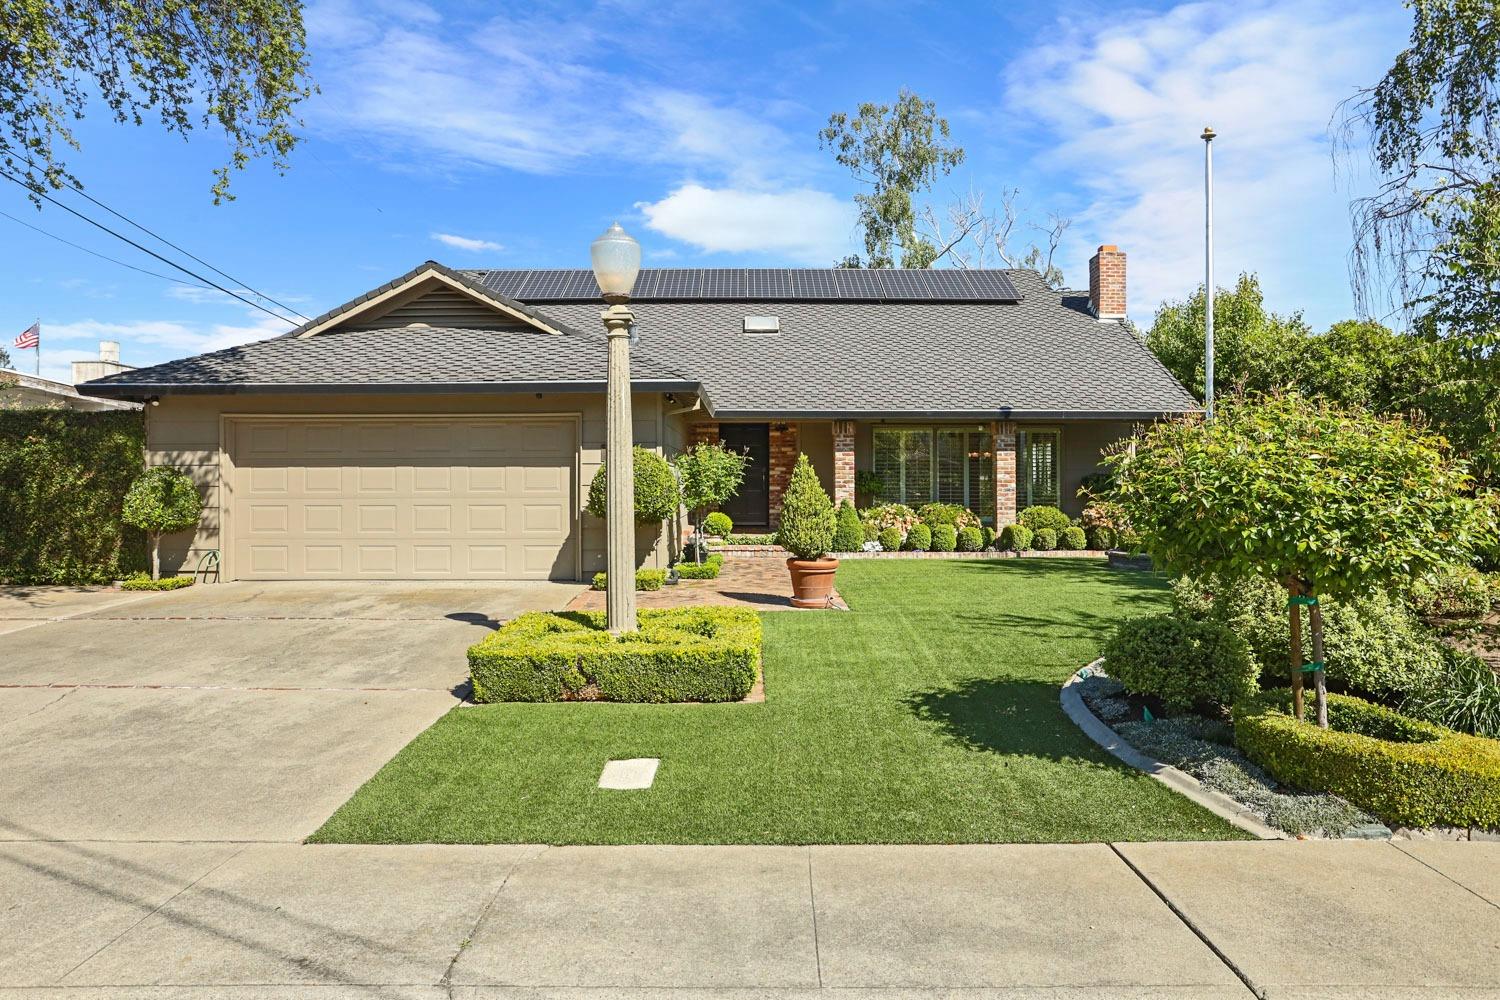 Photo of 3075 Canal Dr in Stockton, CA